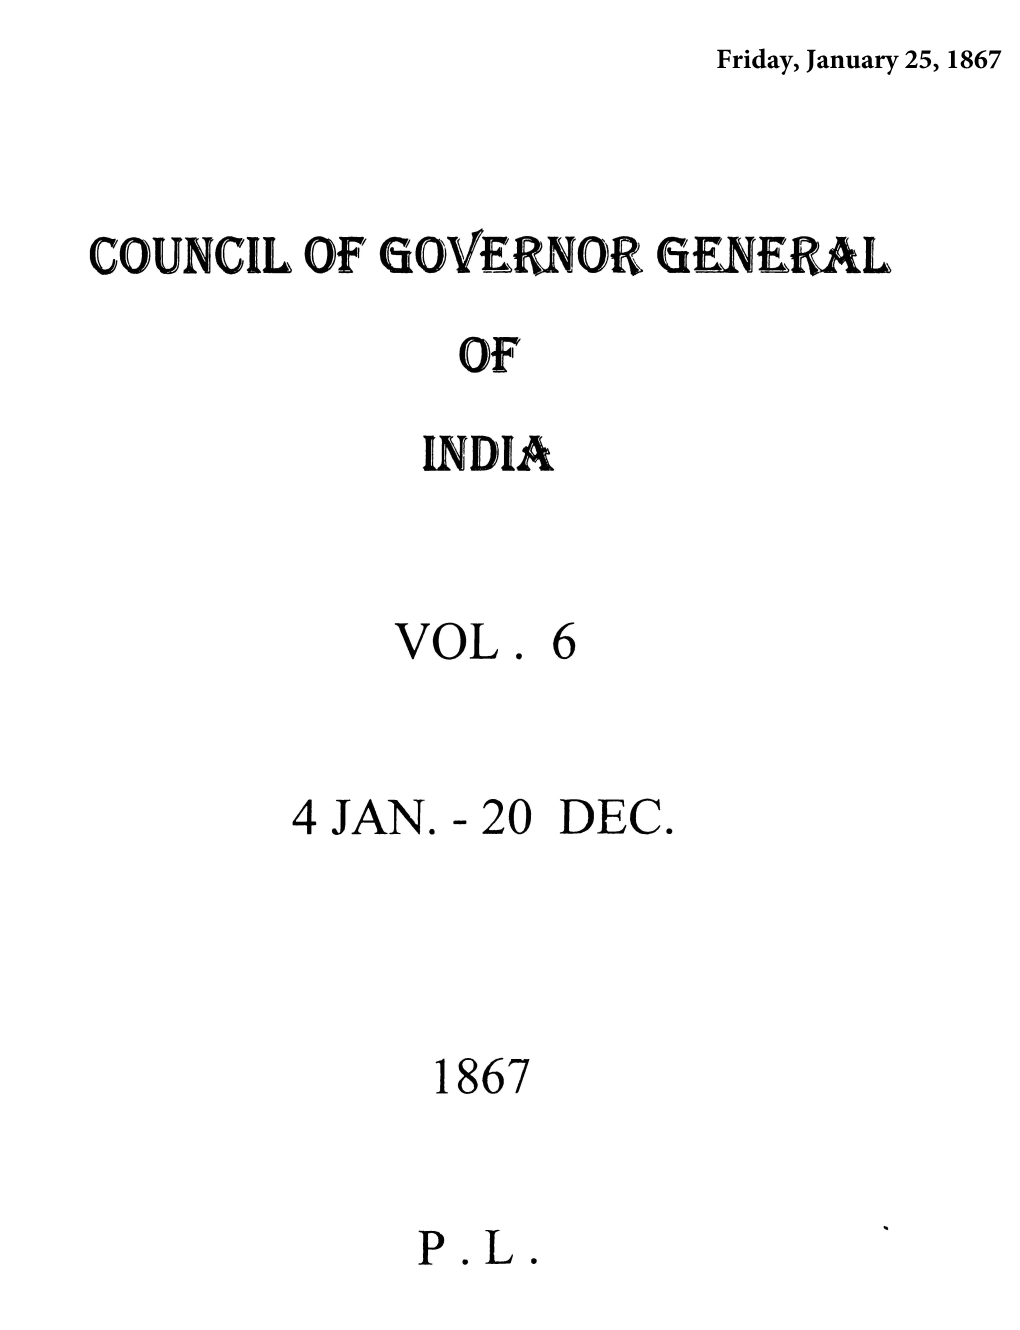 COUNCIL Off GOVERNOR GENERAL of INDIA